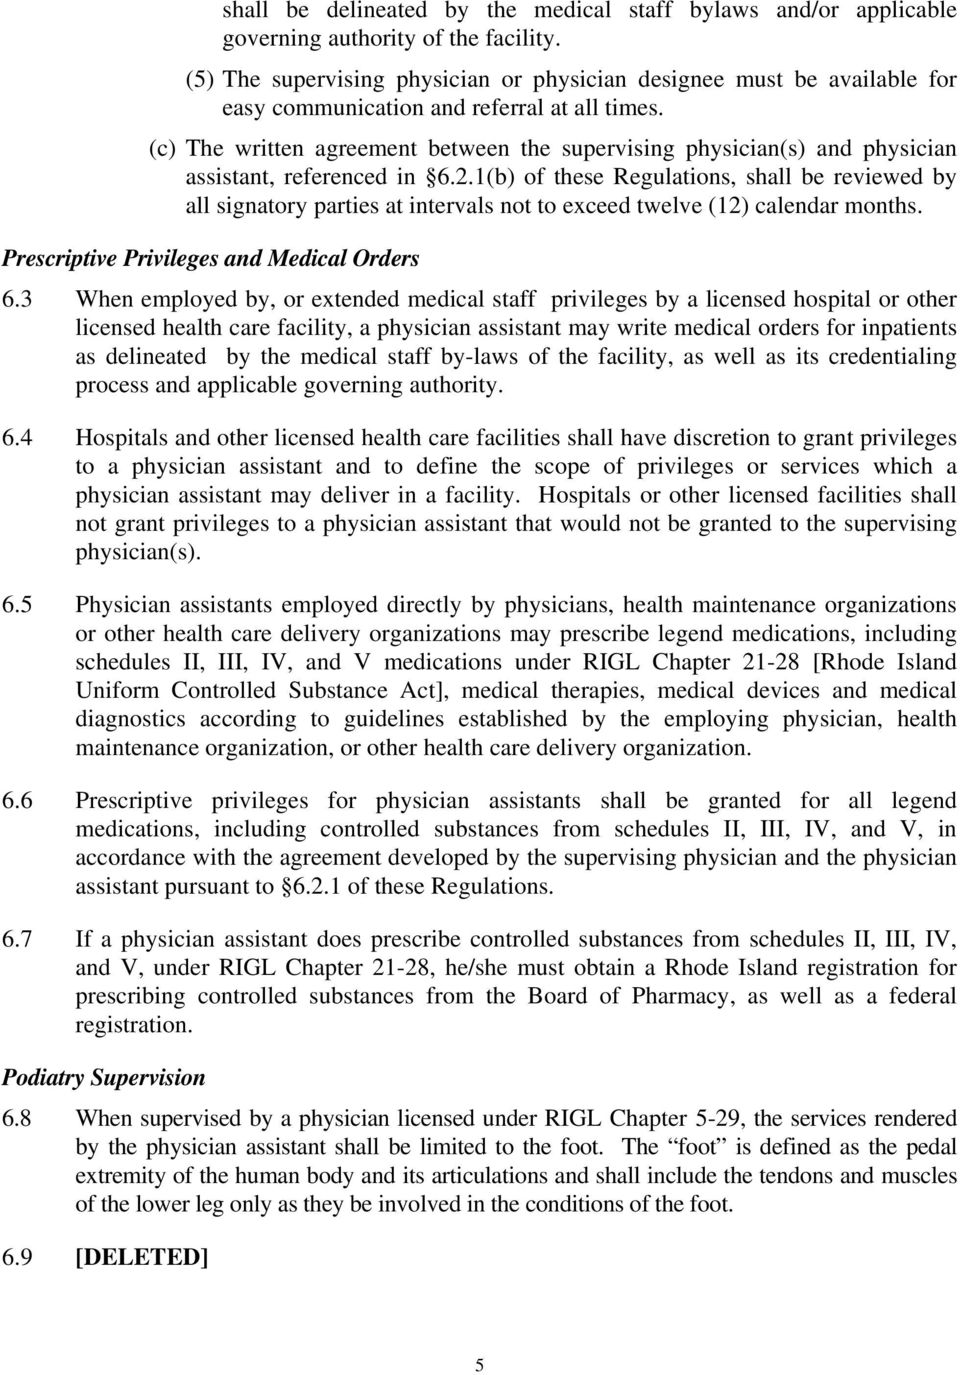 (c) The written agreement between the supervising physician(s) and physician assistant, referenced in 6.2.